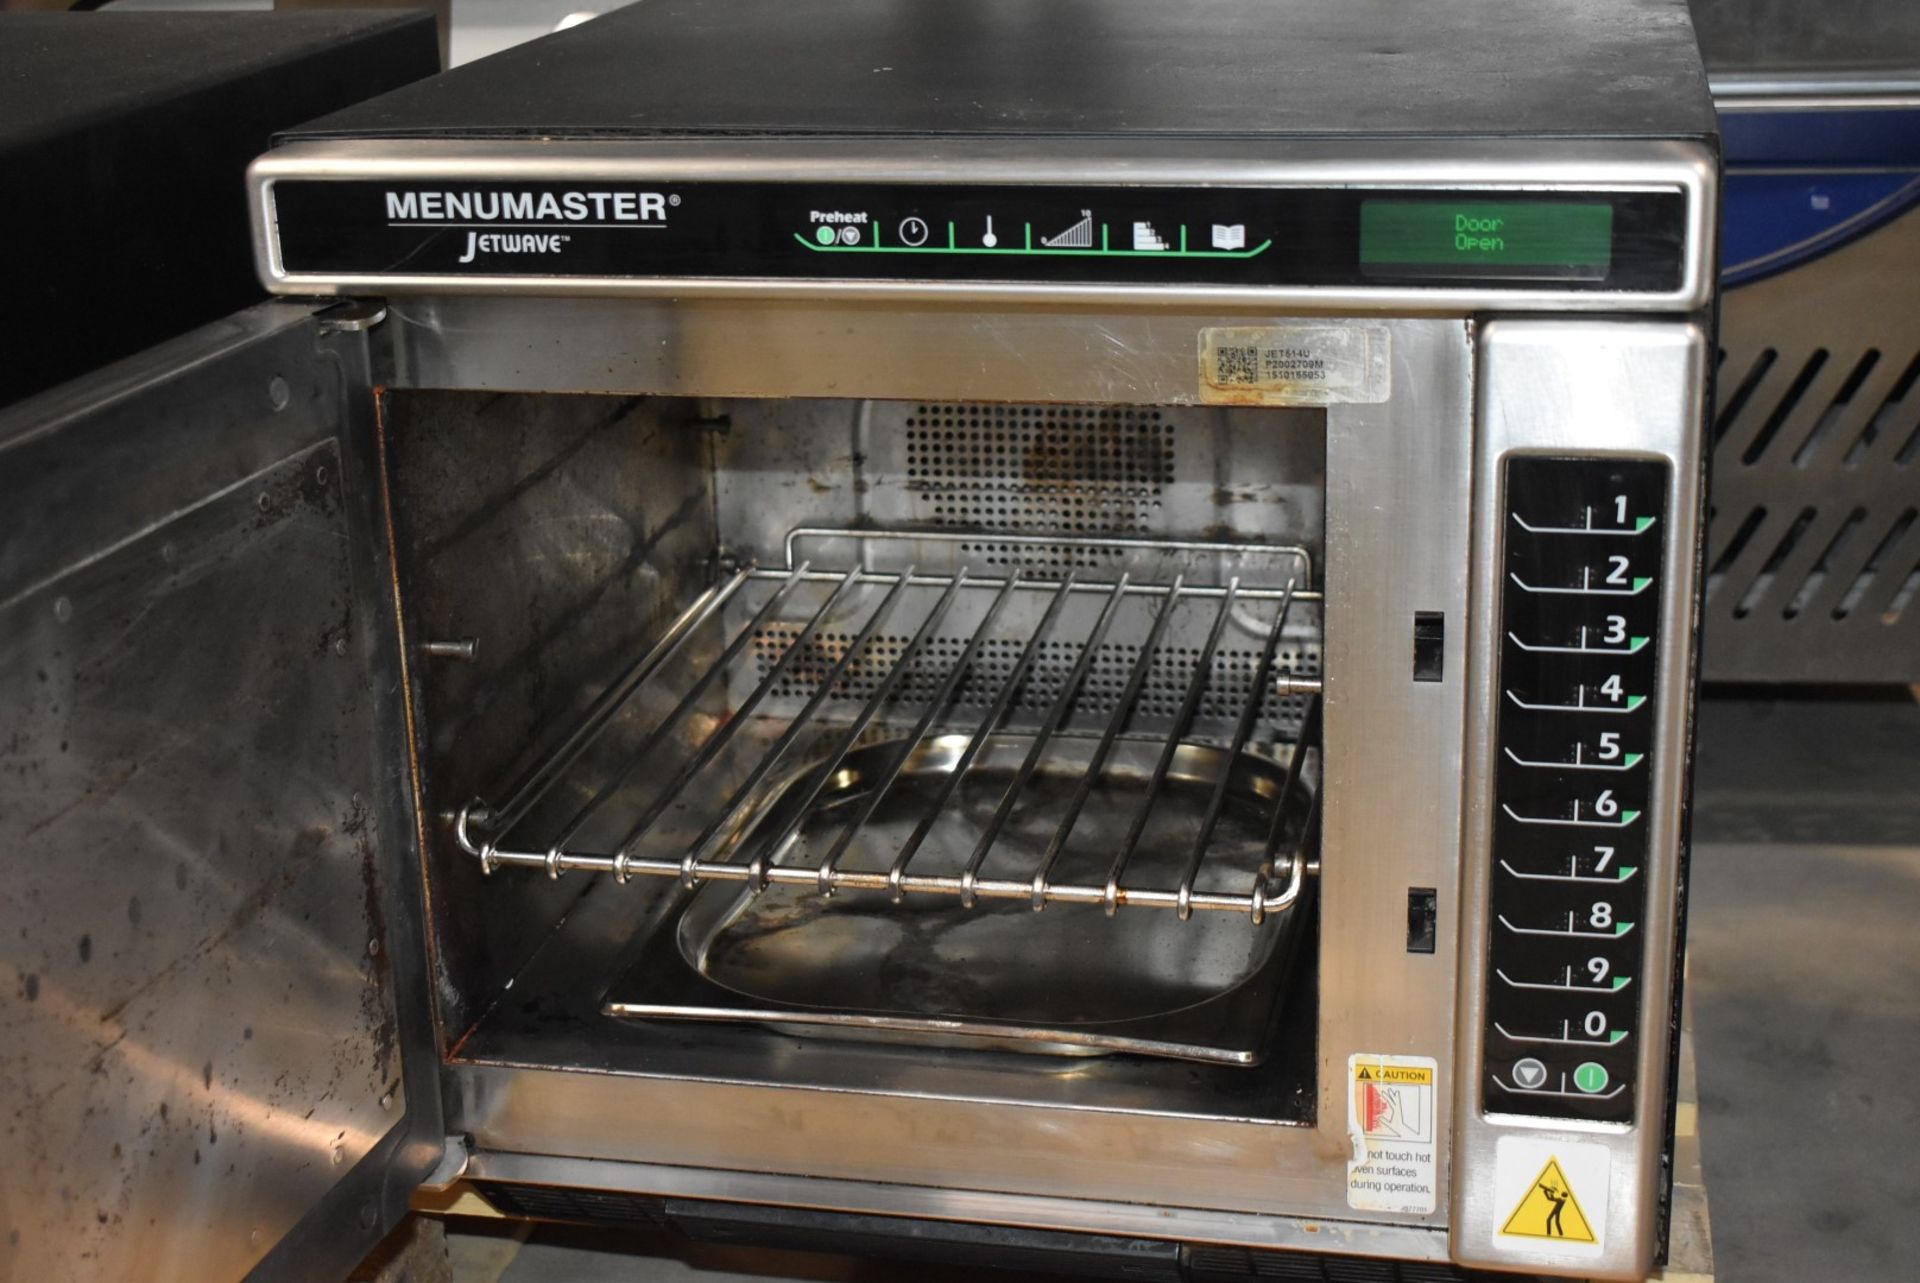 1 x Menumaster Jetwave JET514U High Speed Combination Microwave Oven - RRP £2,400 - Recently Remove - Image 4 of 11